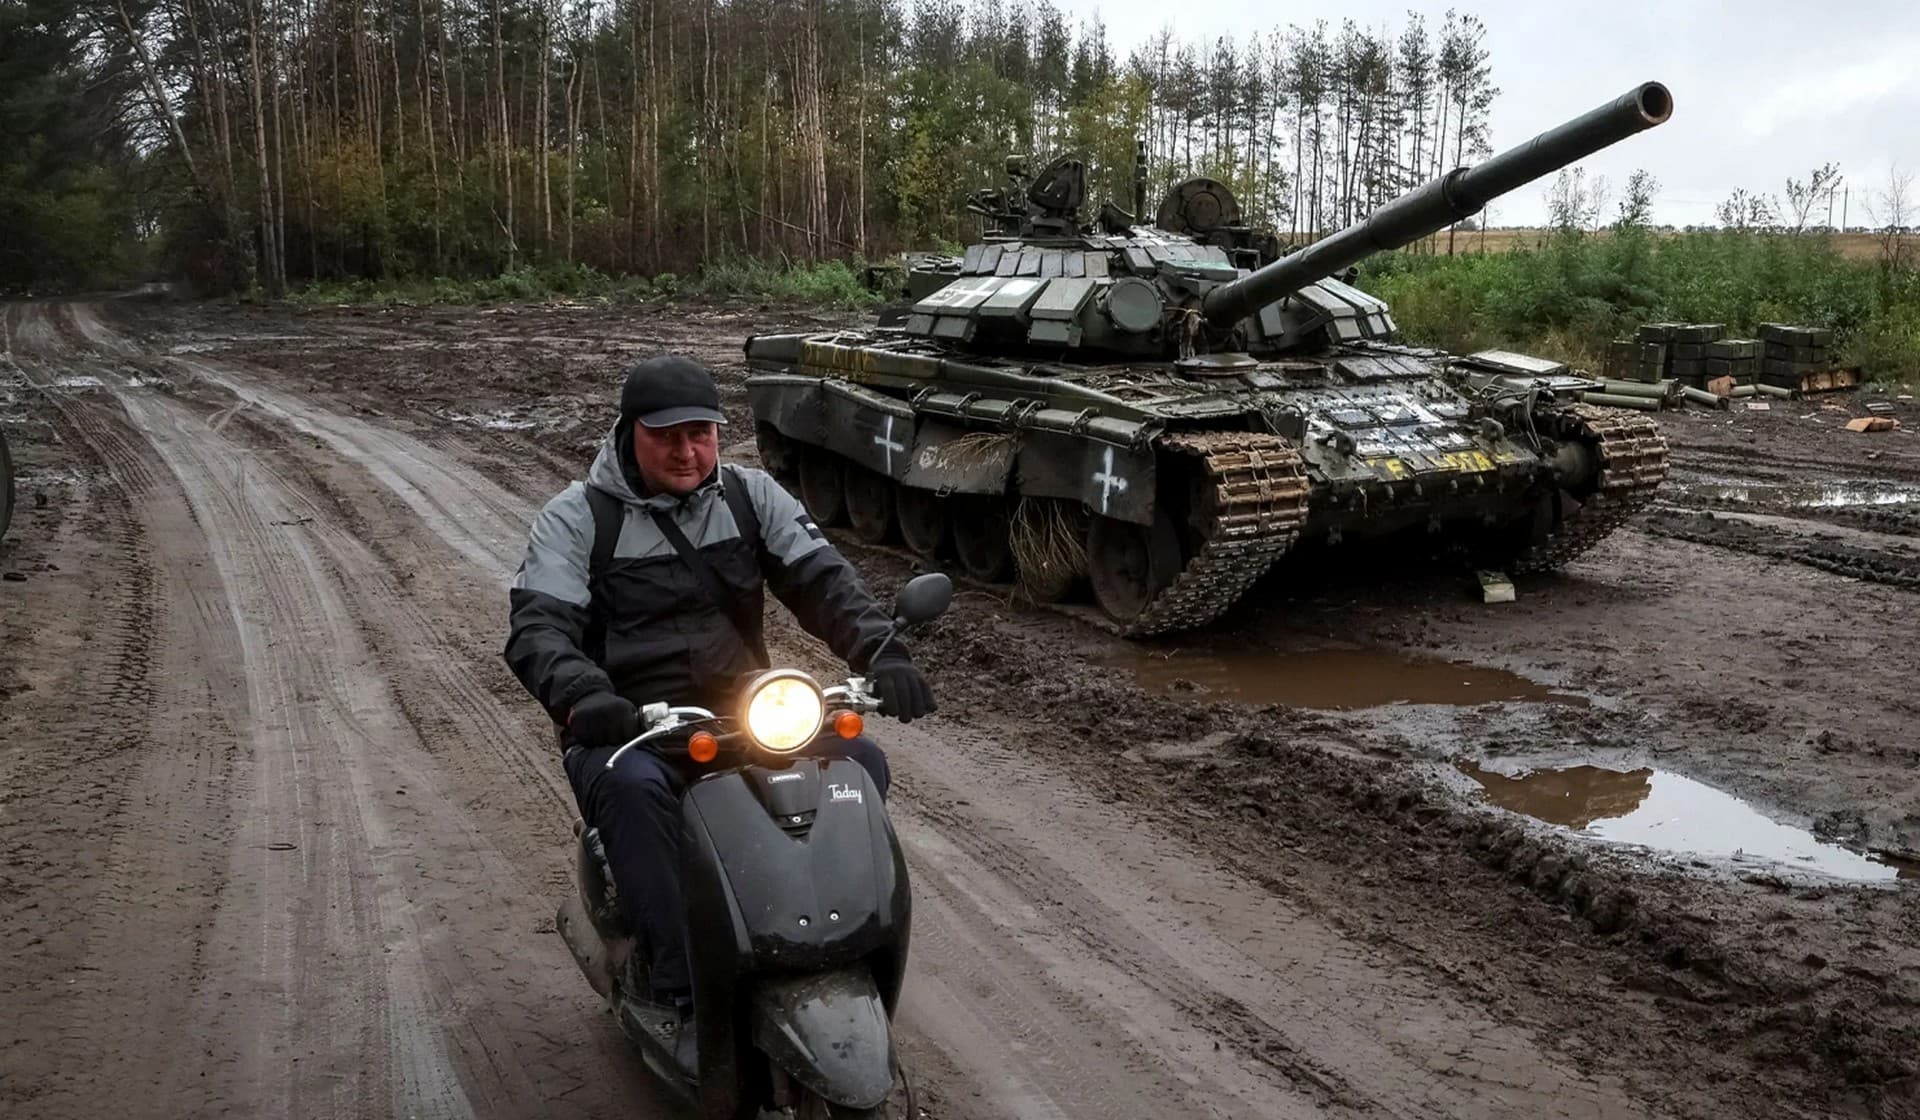 A local resident rides a scooter near a destroyed Russian tank in the town of Izium